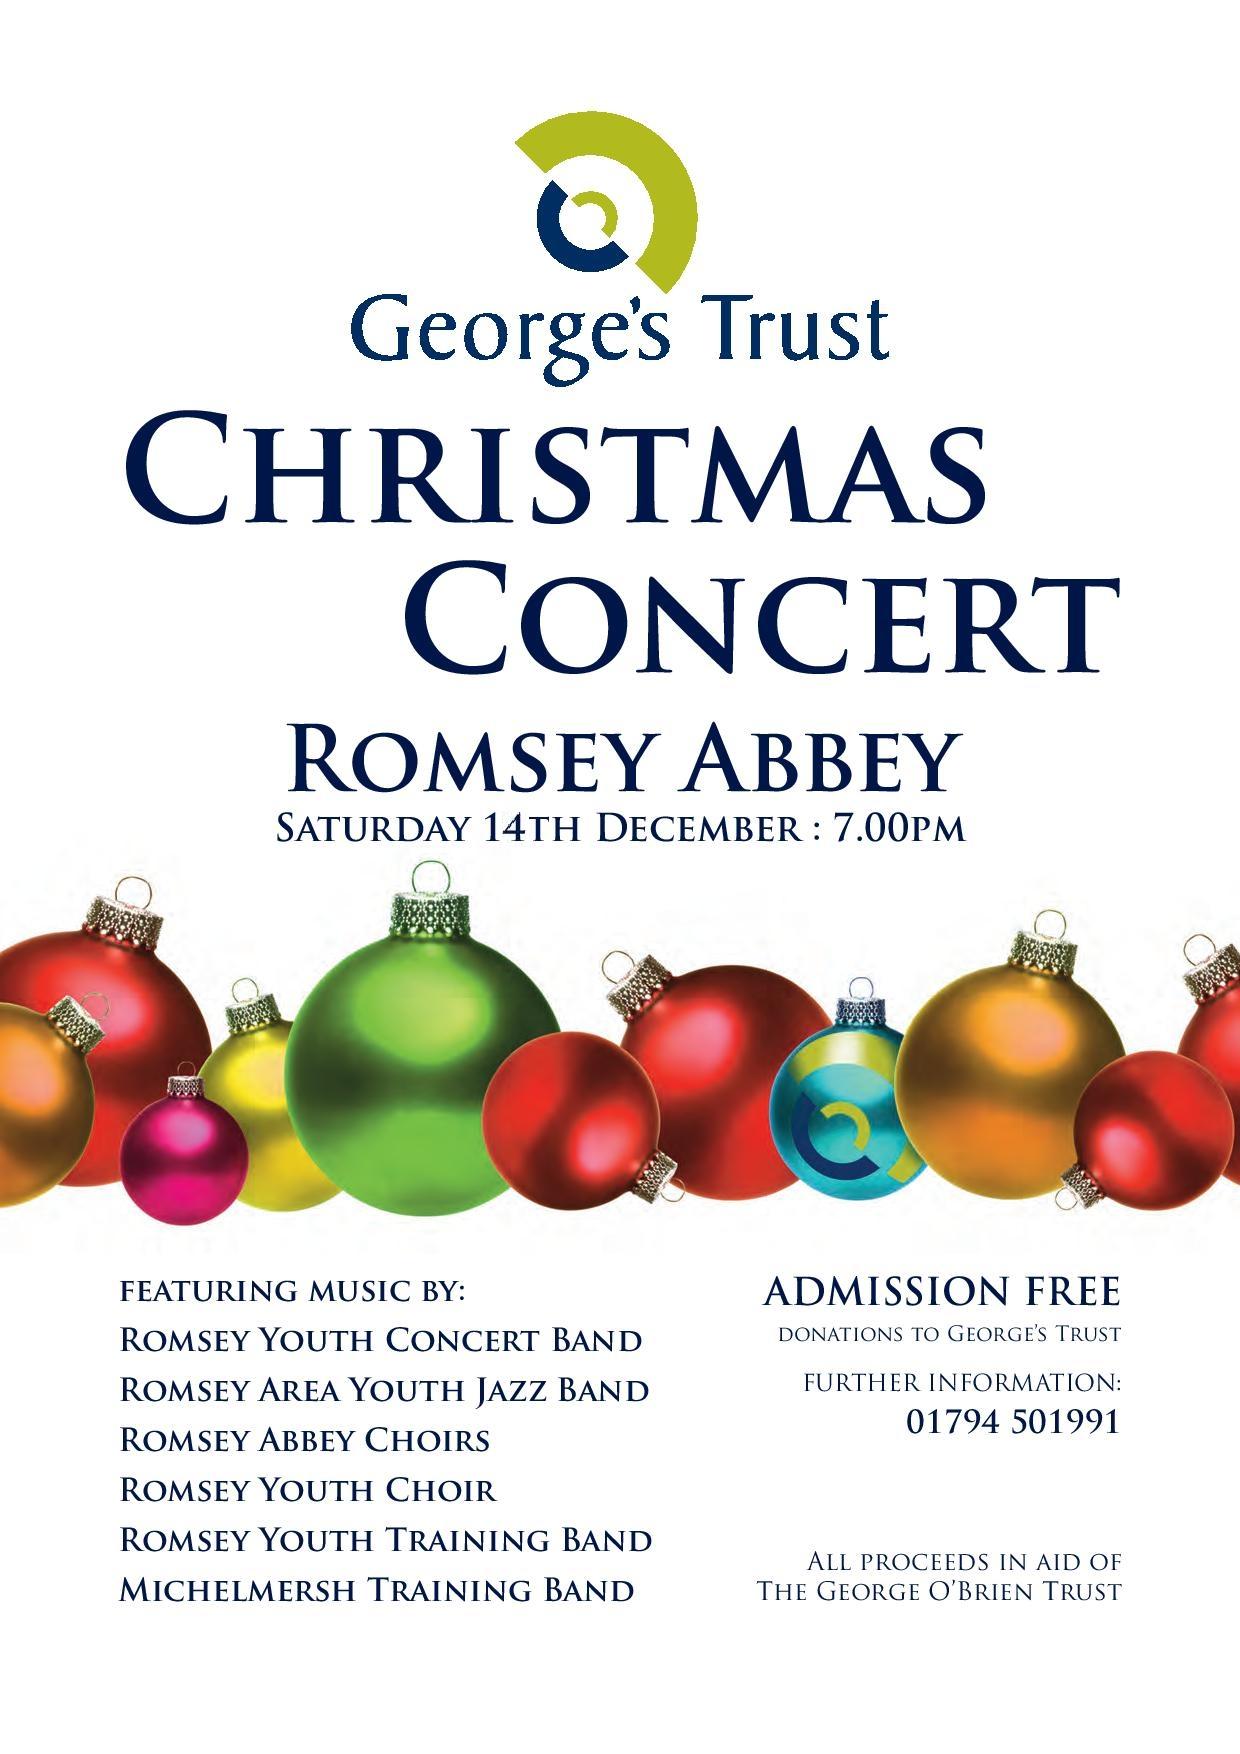 Our 2013 Christmas Concert Will Be On 14th December In Romsey Abbey